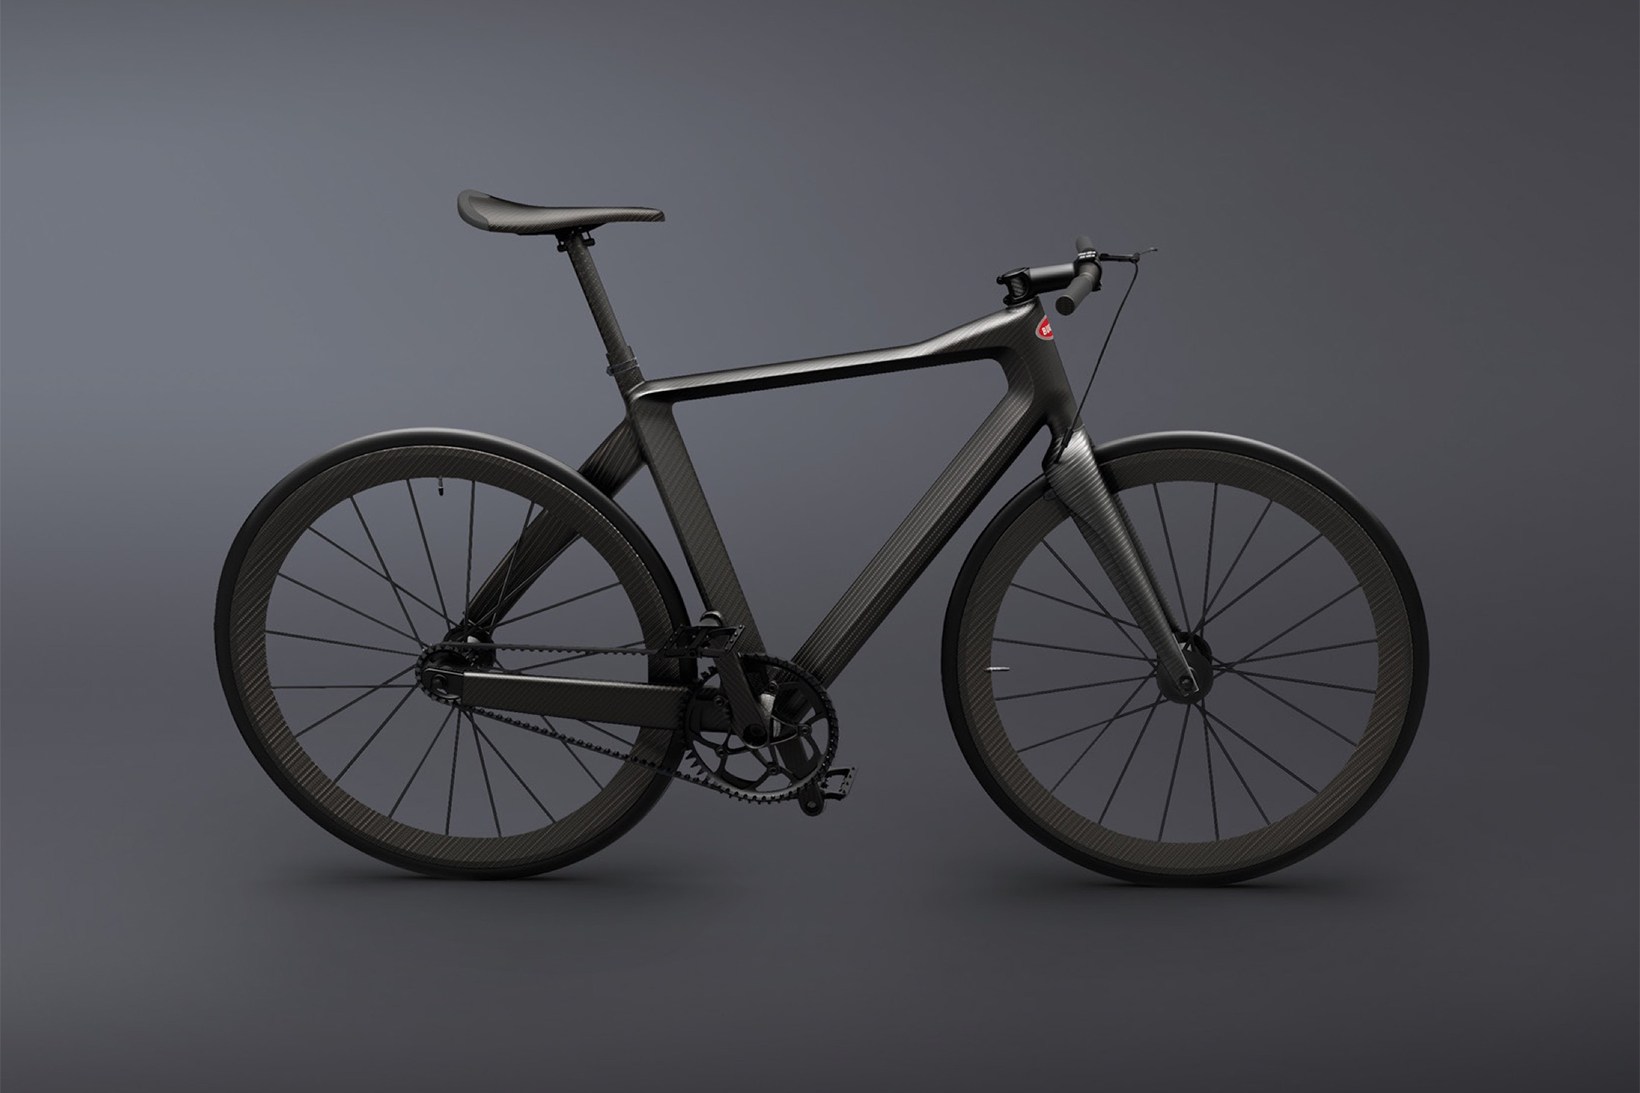 Bugatti Bike Is Now The World’s Most Expensive Fixie